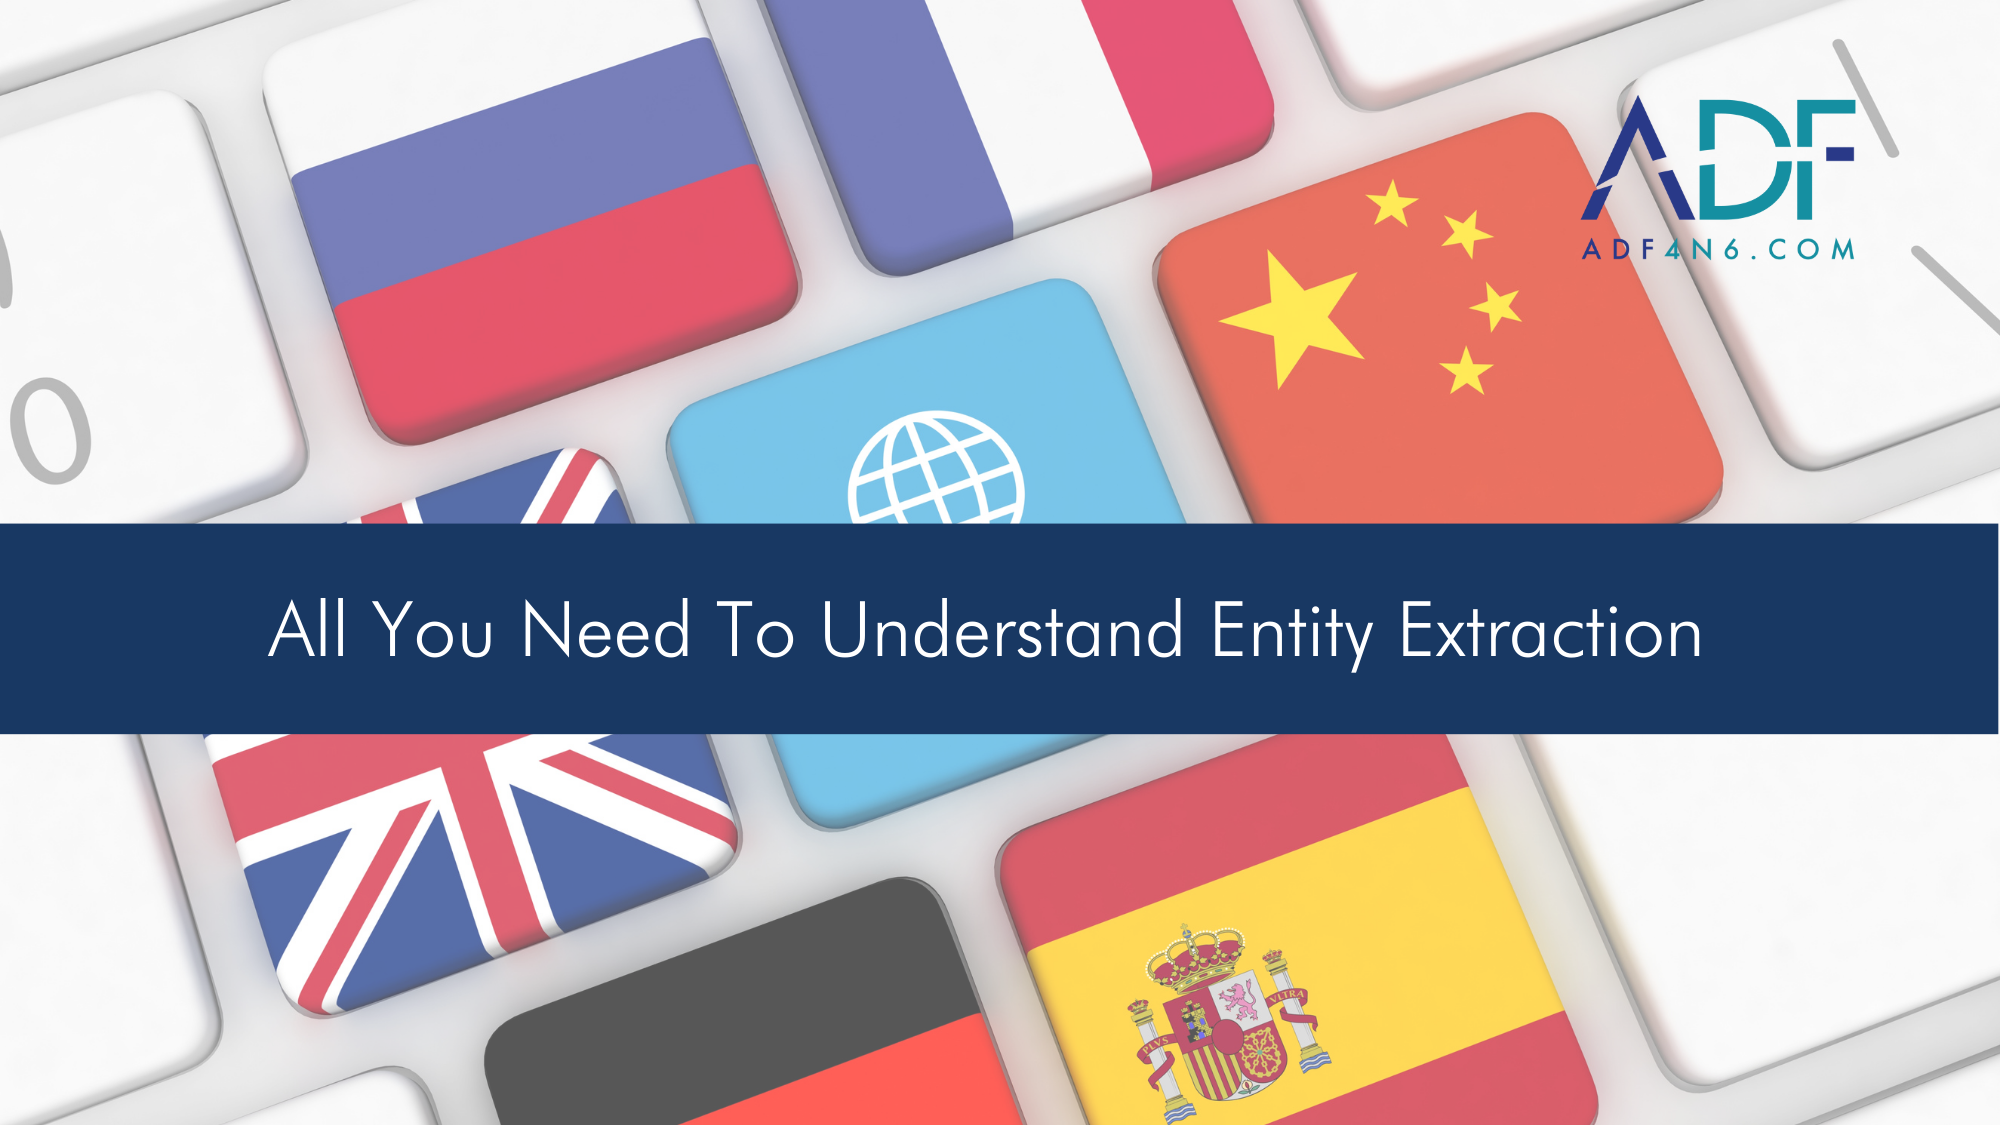 All You Need To Understand Entity Extraction: A blog about the entity extraction process and what it means